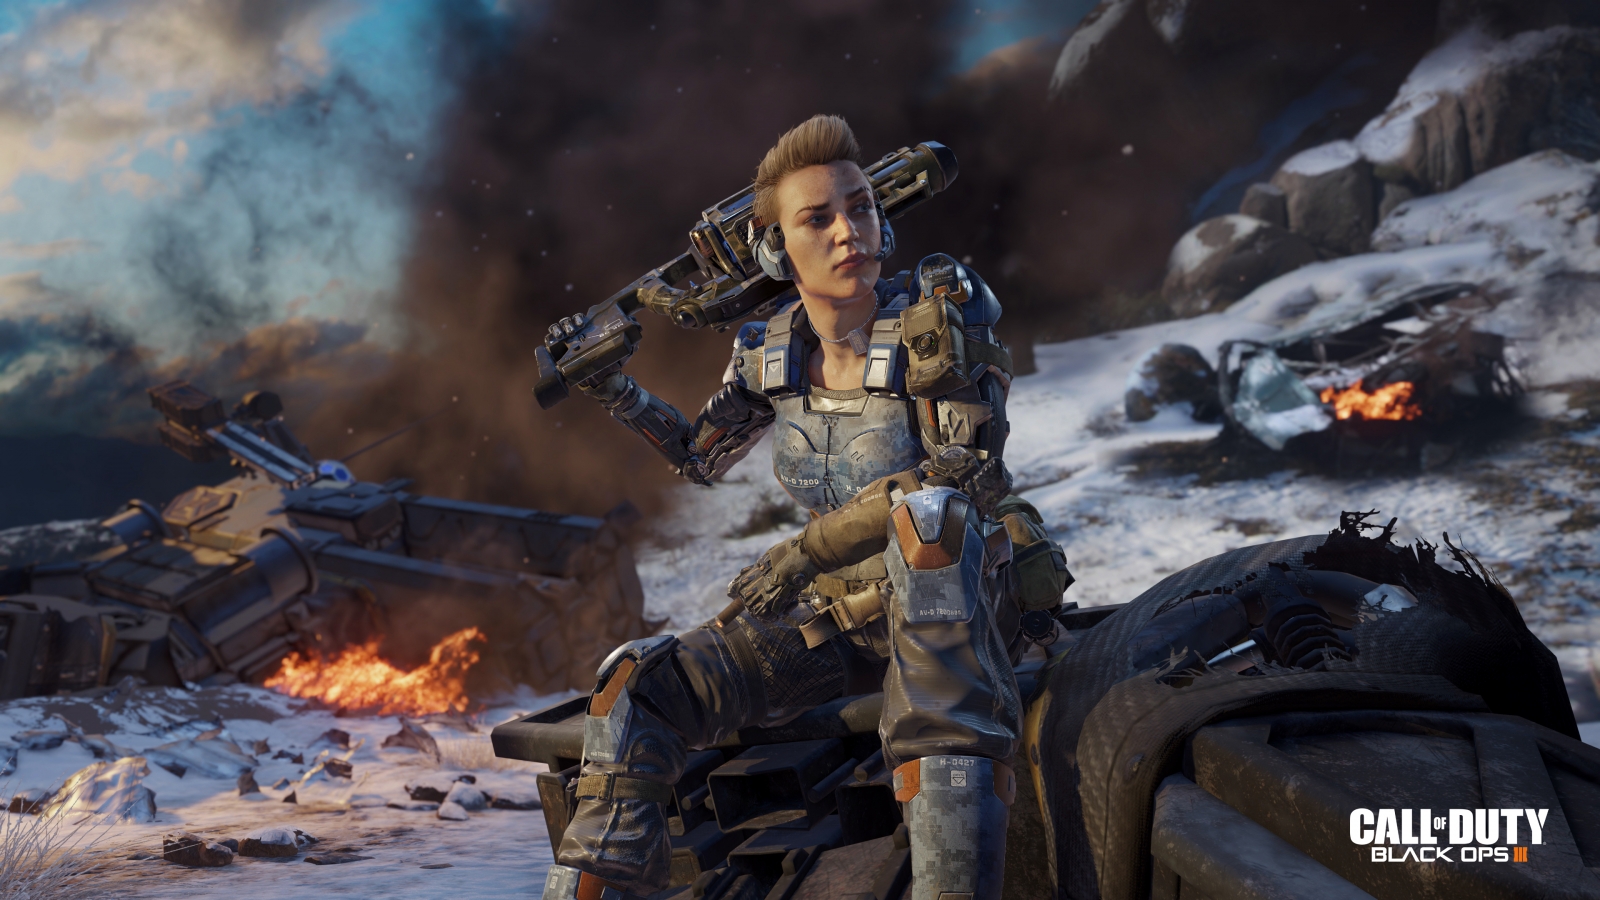 Call of Duty Black Ops 3 Girl for 1600 x 900 HDTV resolution